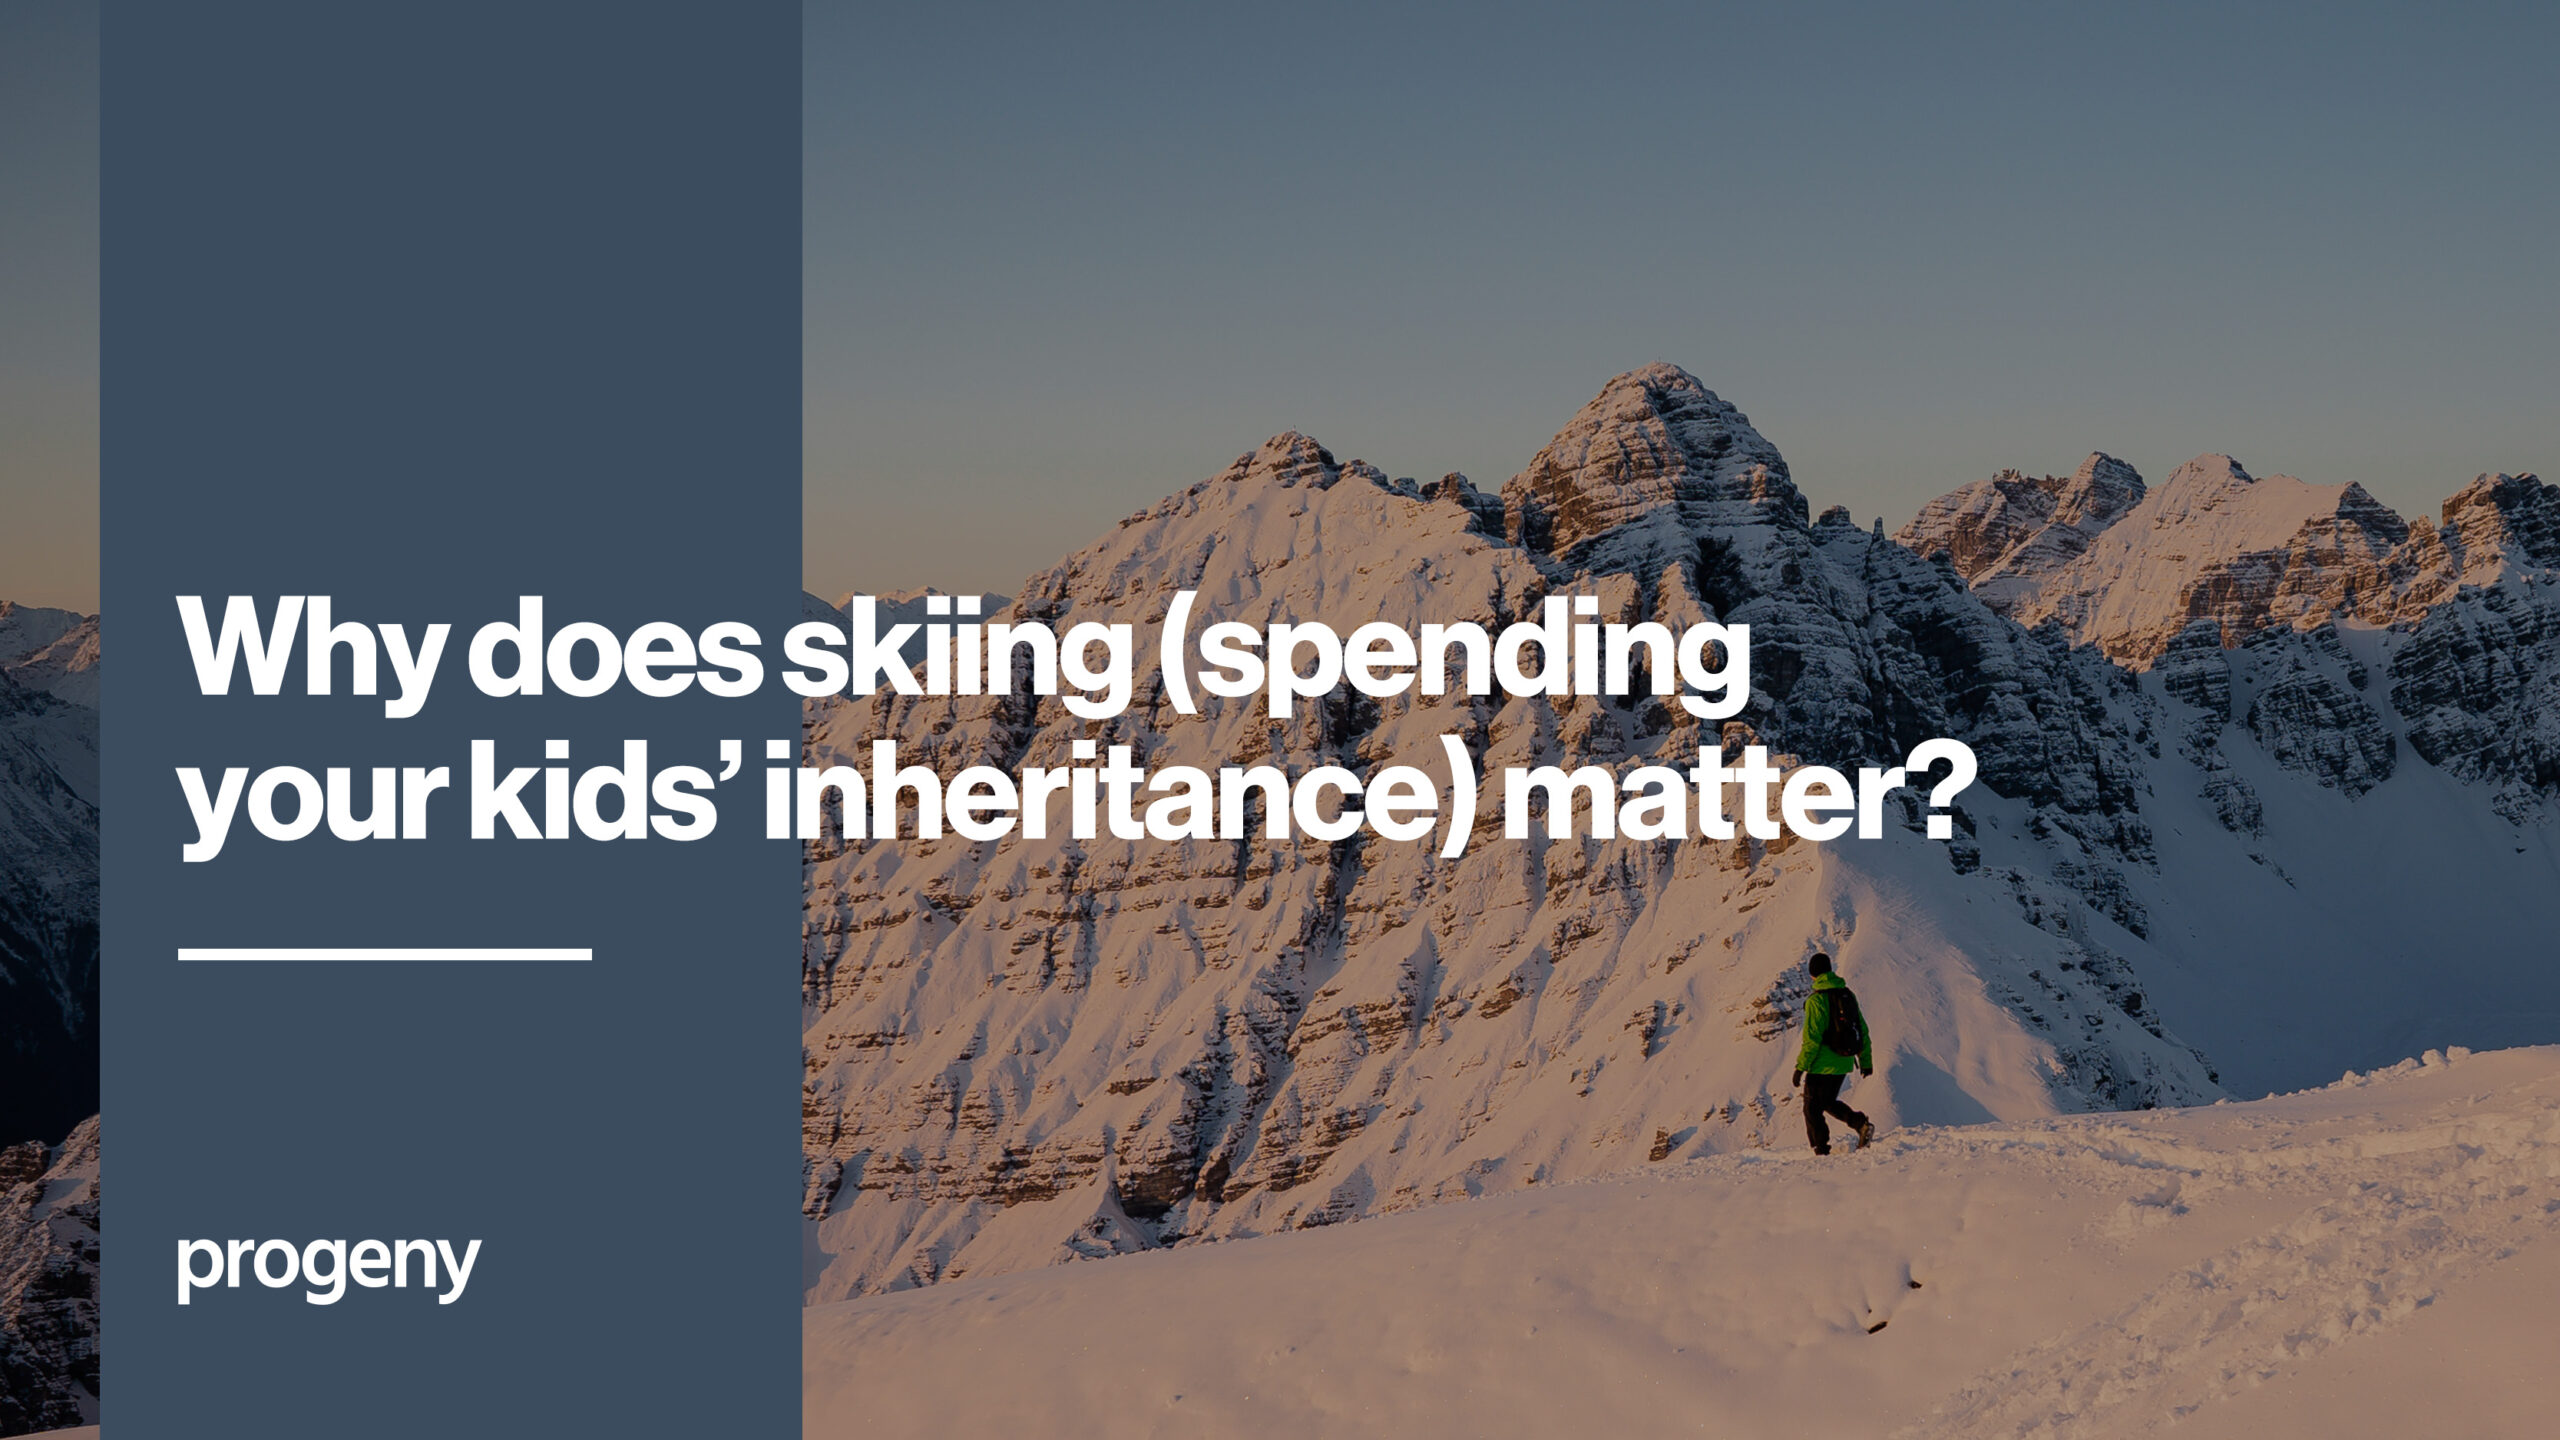 Why does skiing (spending your kids’ inheritance) matter?